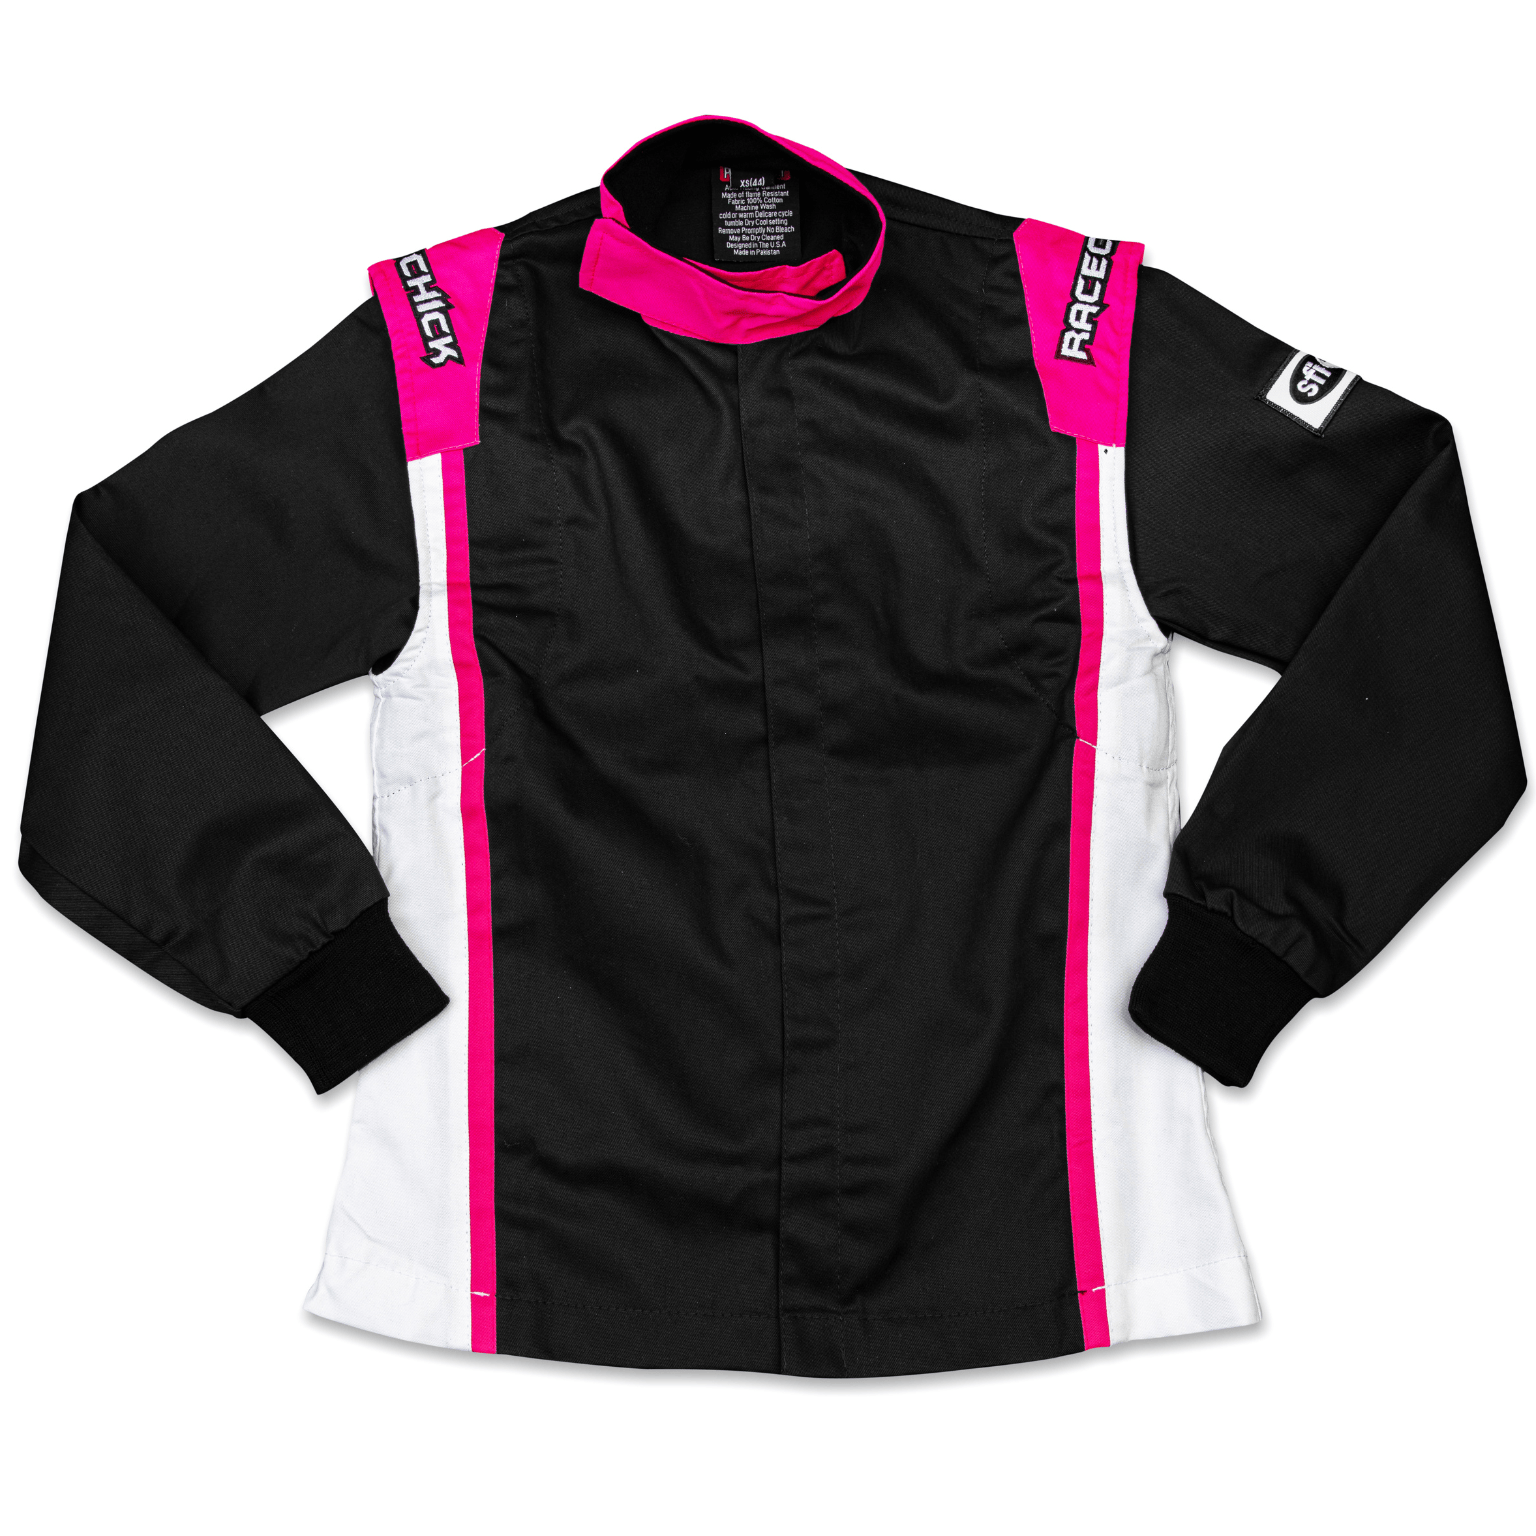 Black/Pink Racing Suits Tagged Fire Suit - Racechick